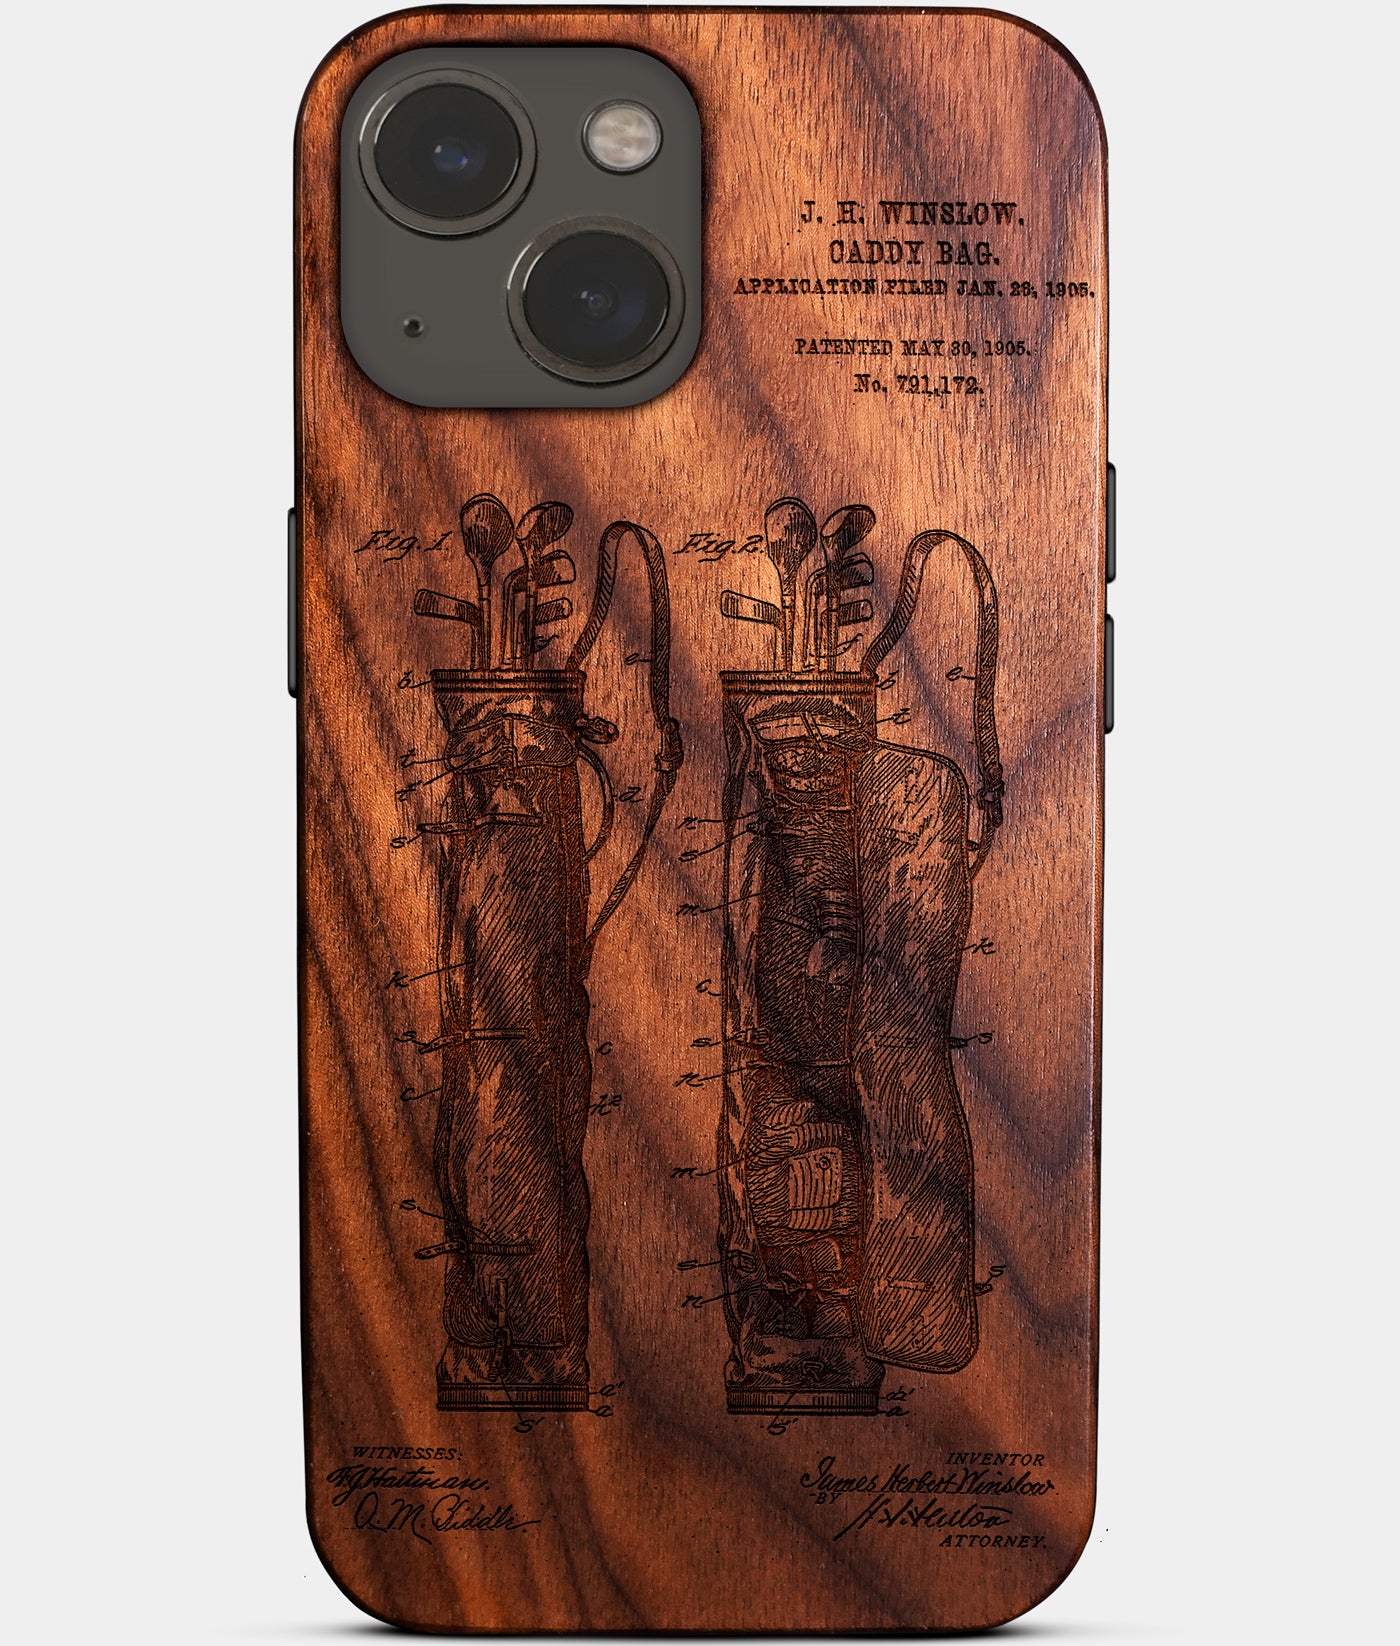 Custom Golf iPhone 14 Plus Cases Golf Bag Personalized Golf Gifts For Men 2022 Best Golf Christmas Gifts Best Country Club Gifts Carved Wood Unusual Golf Gift For Him Monogrammed iPhone 14 Plus Covers